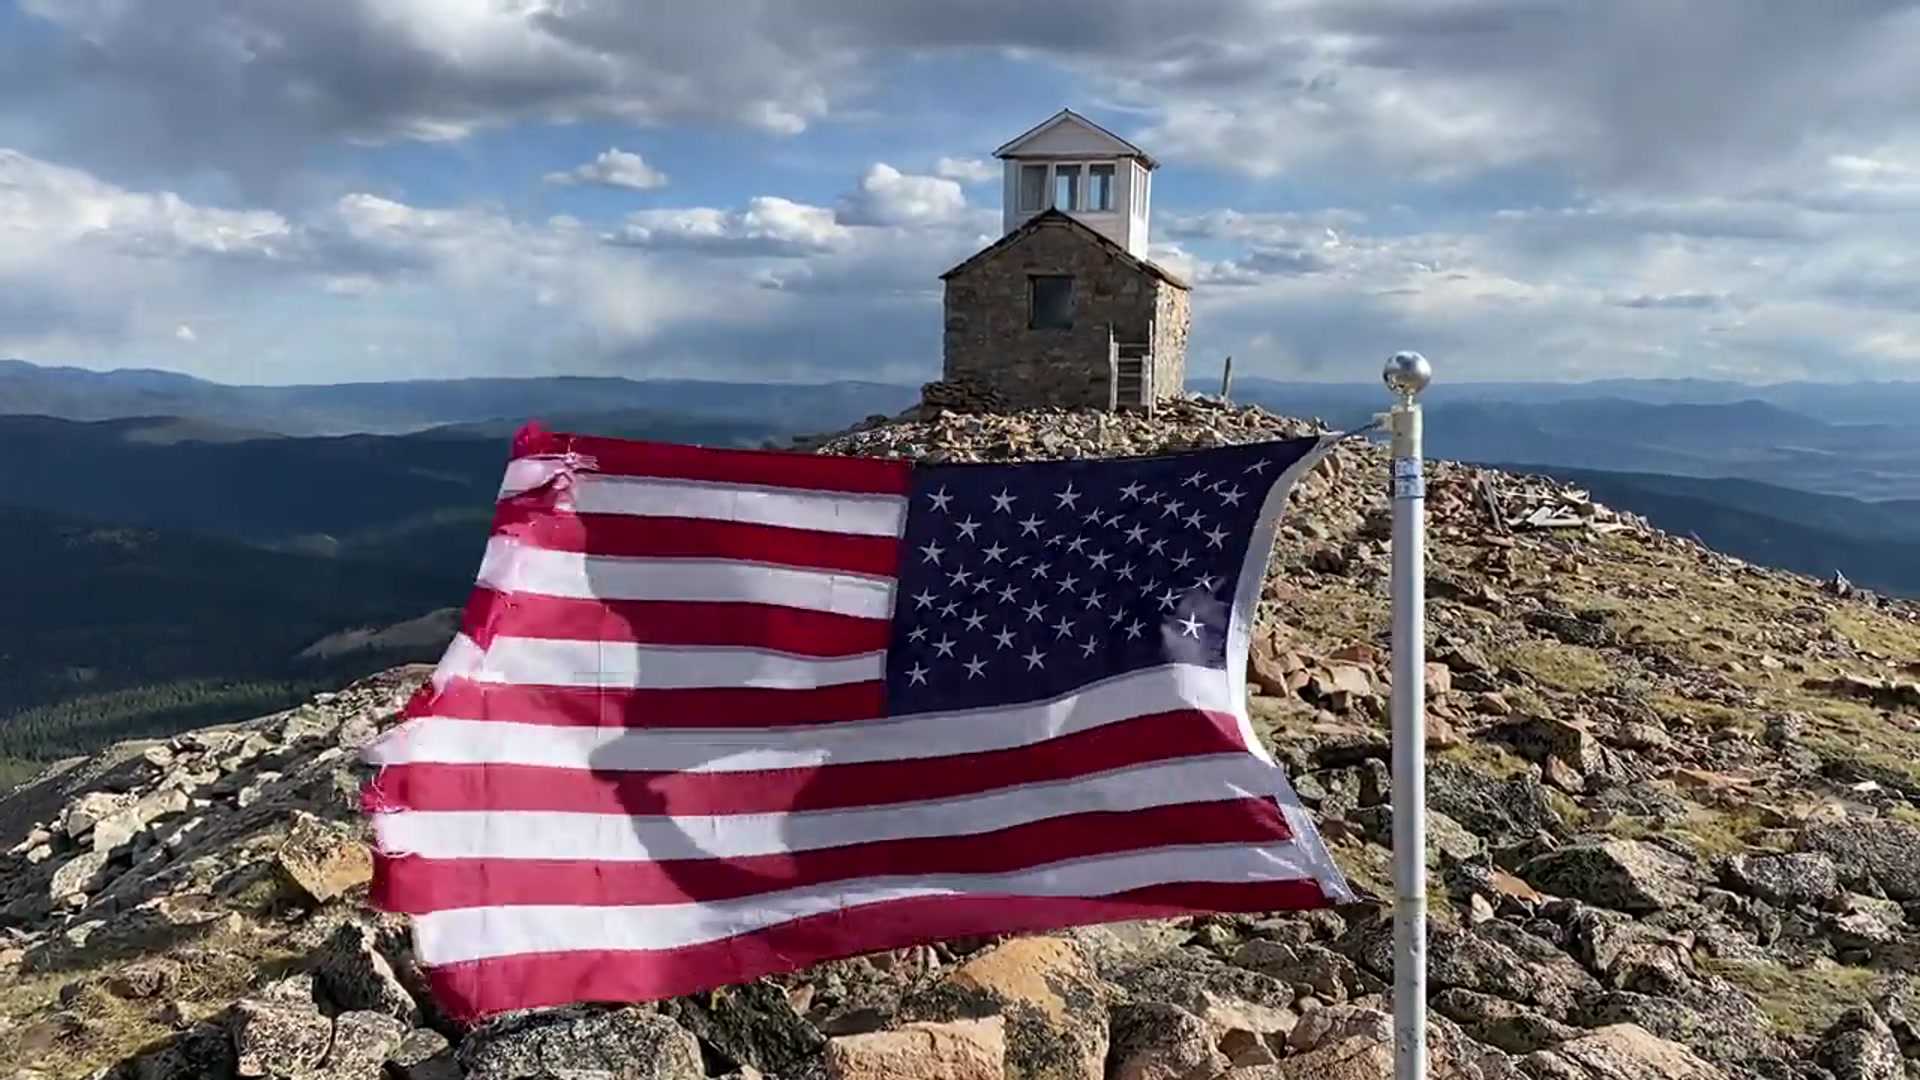 Fairview Peak Fire Lookout and Summit Flag